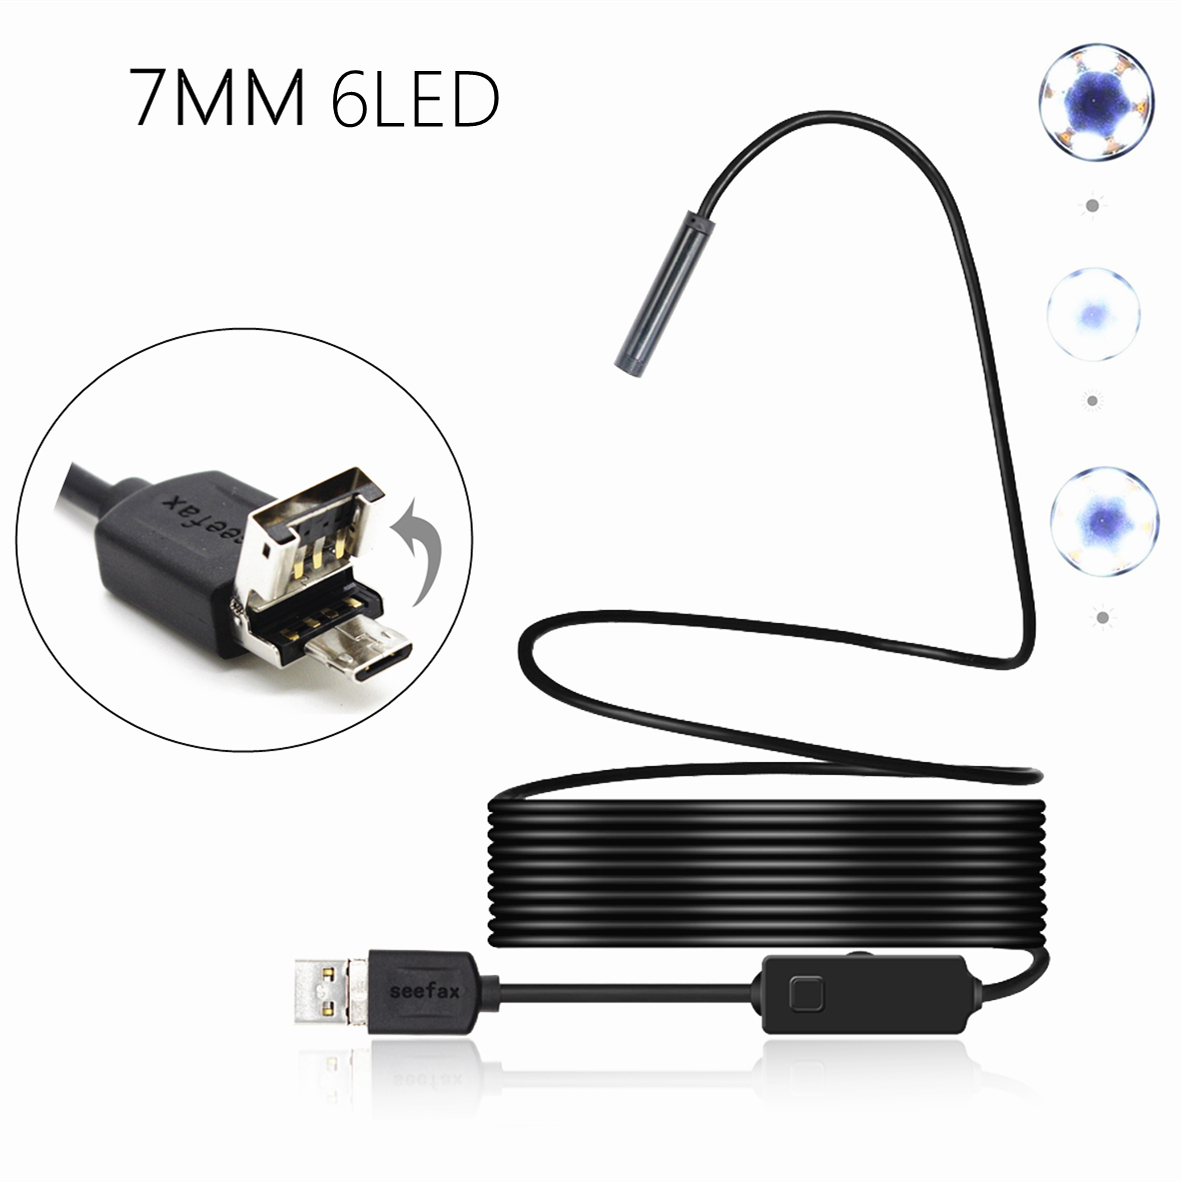 

2 in 1 7mm 6LED IP67 Micro USB/USB Endoscope Borescope Inspection Camera Rigid Cable for Android PC